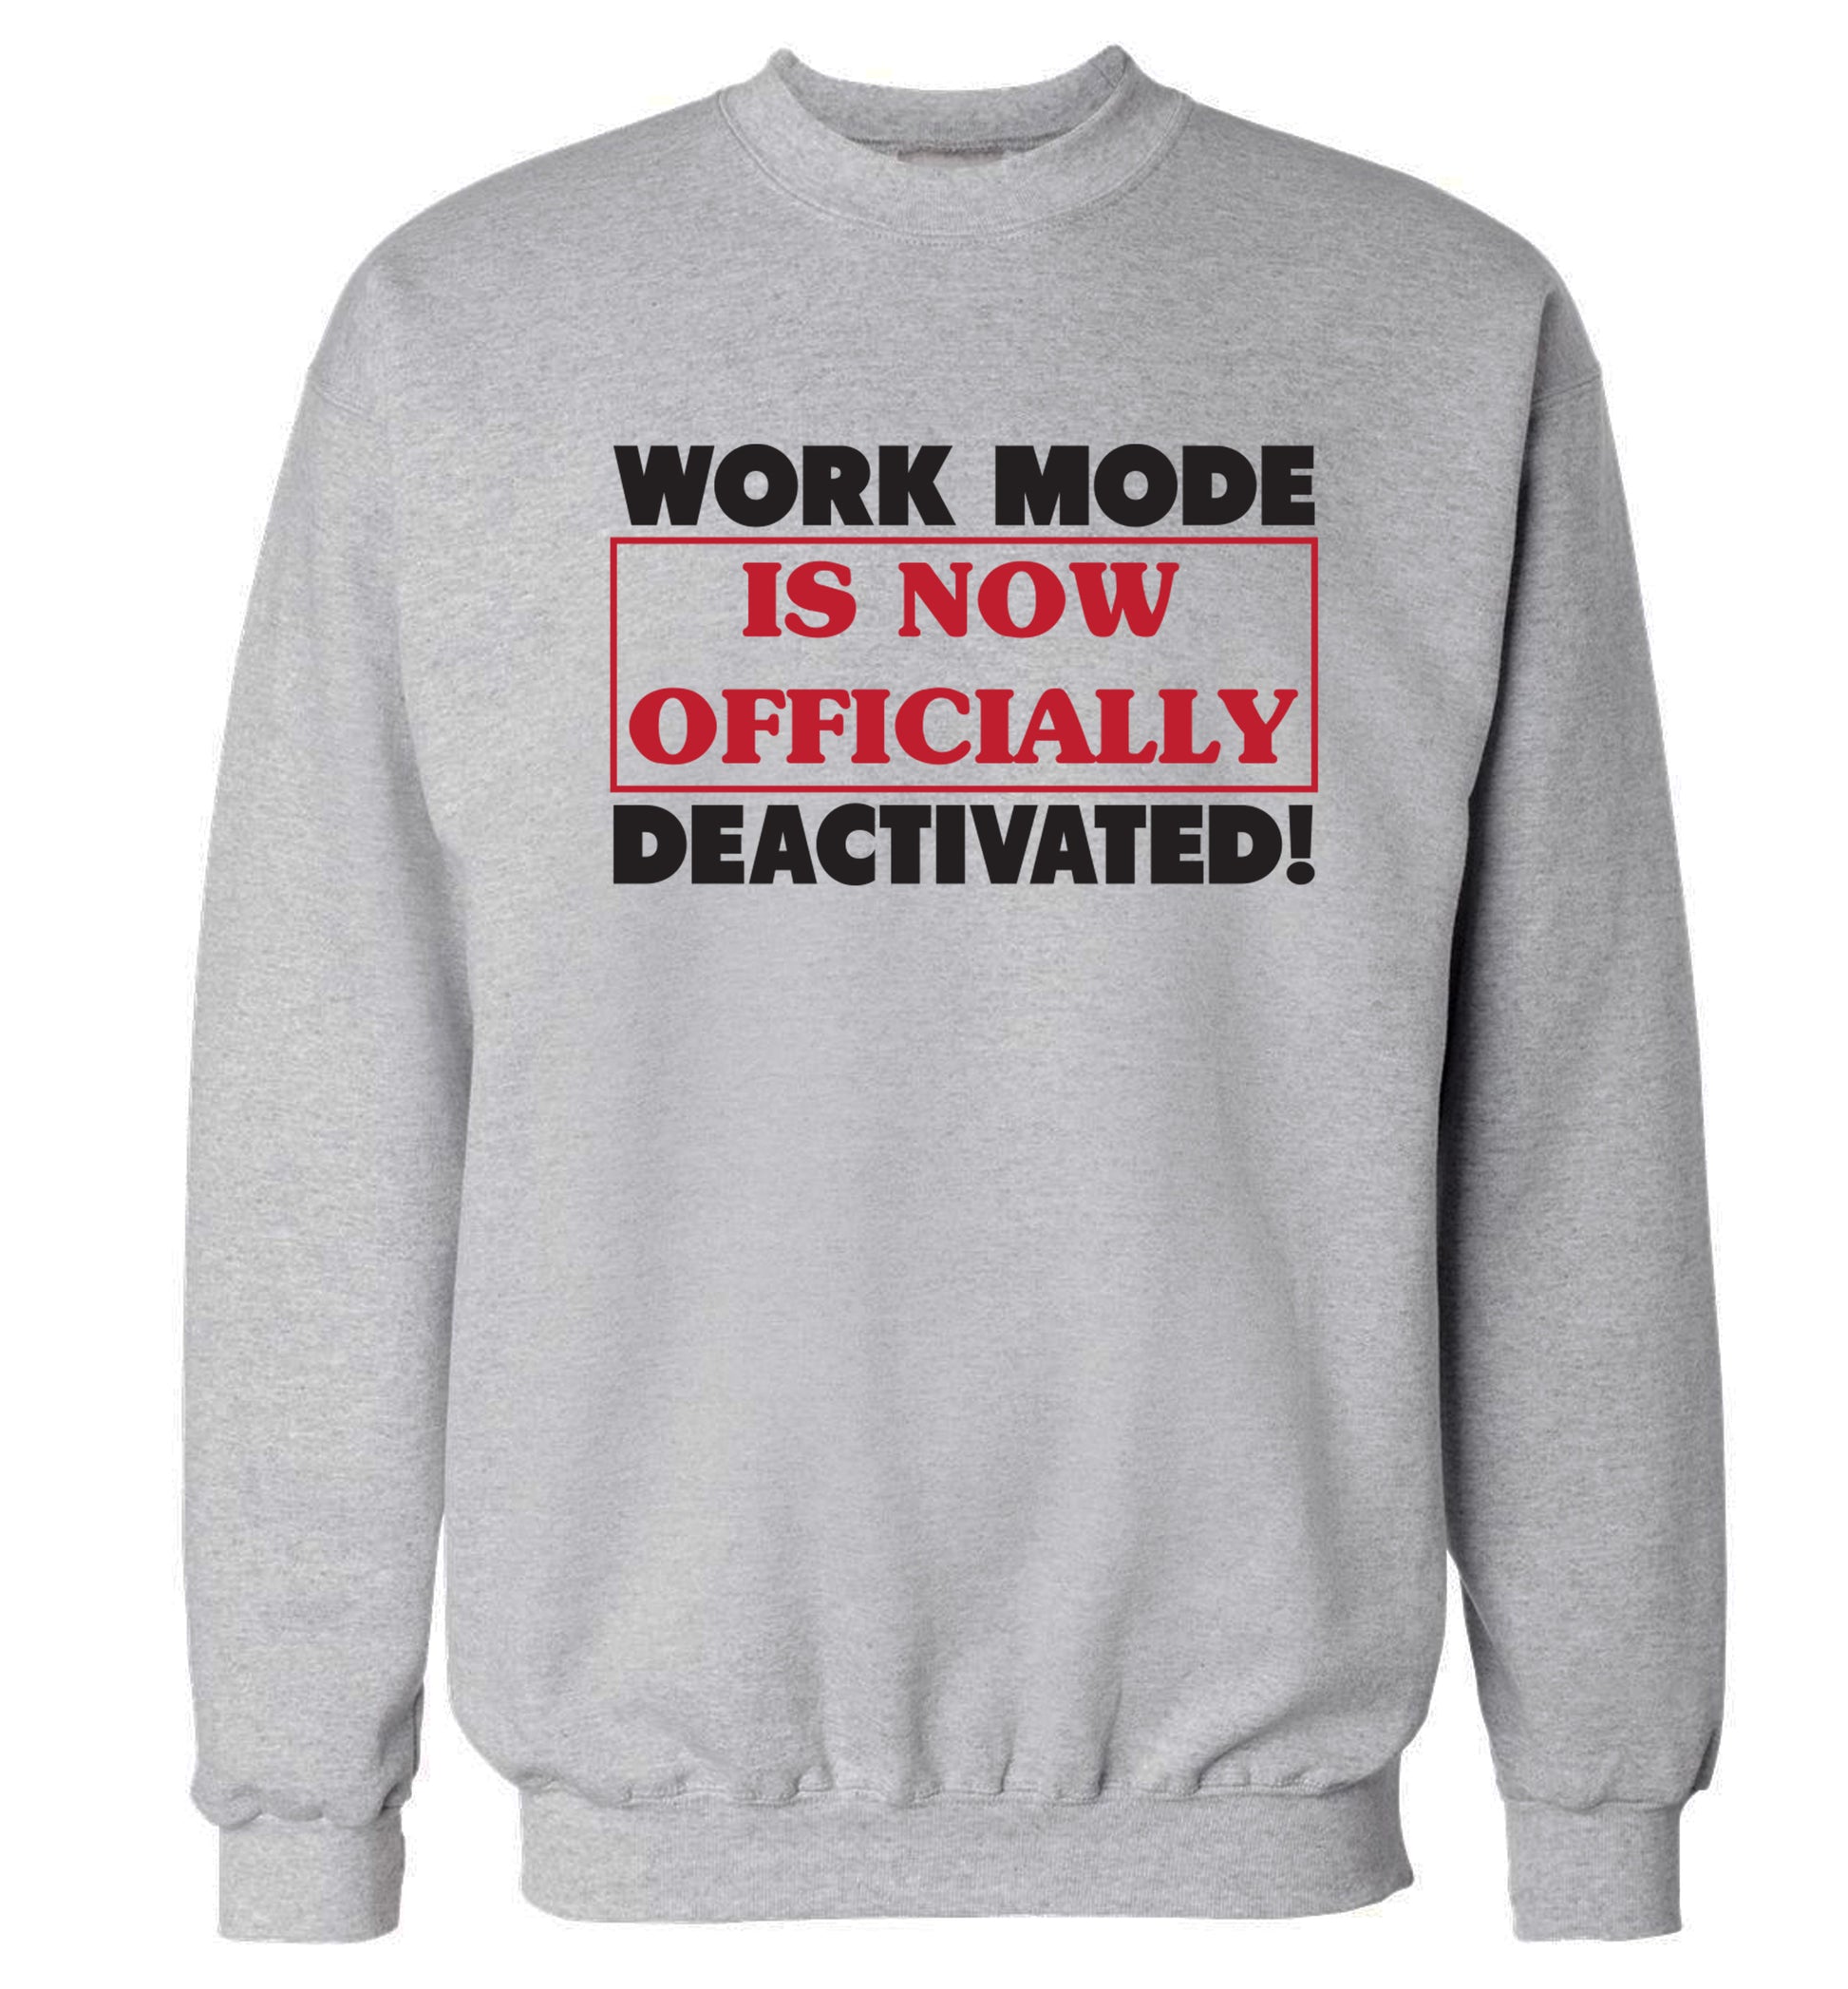 Work mode is now officially deactivated Adult's unisex grey Sweater 2XL